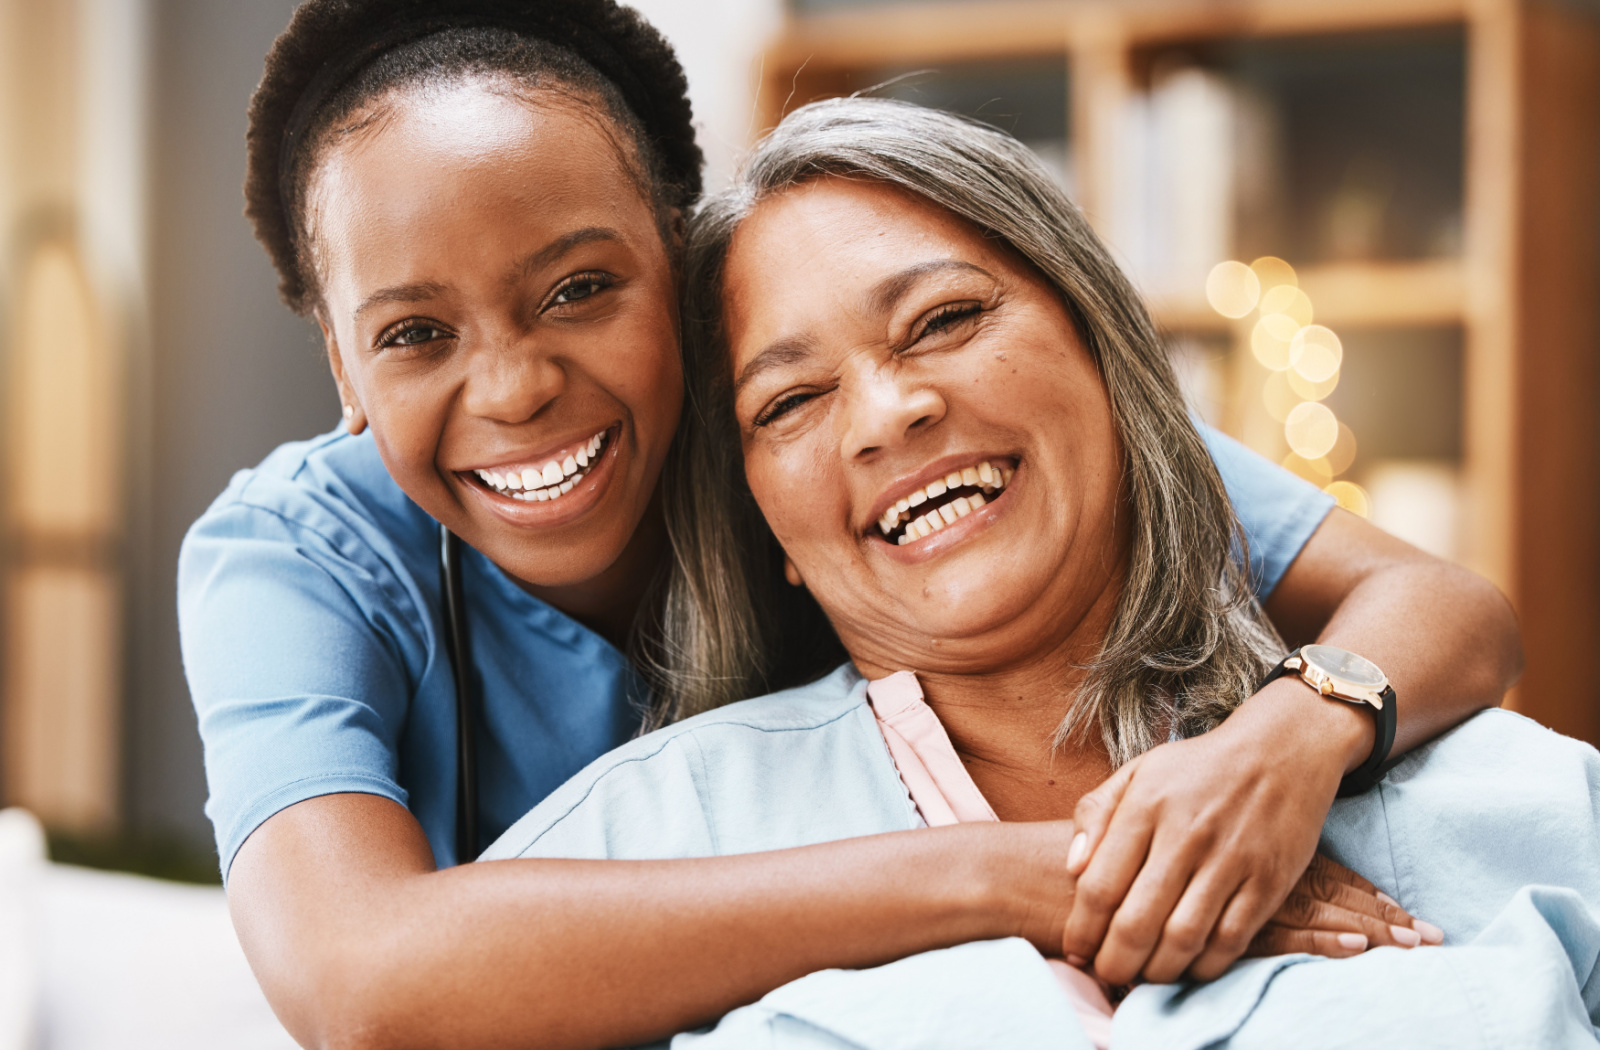 A caregiver and an older adult woman smiling while looking directly at the camera.
